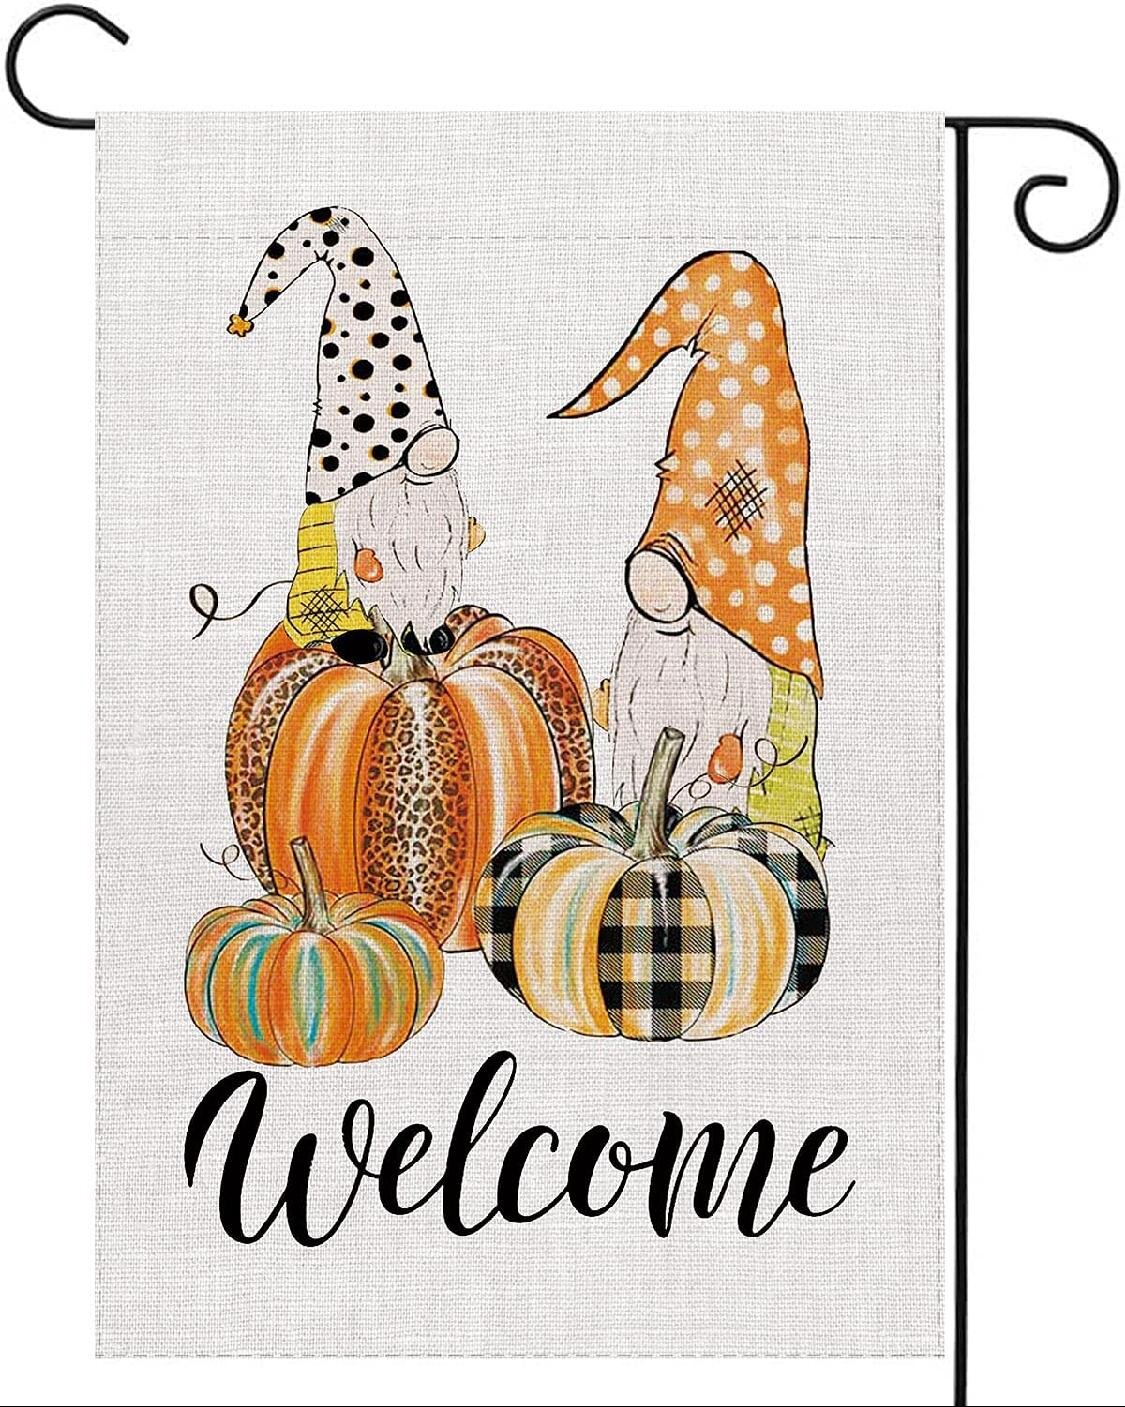 Pumpkin Fall House Flag Floral Burlap Vertical Double Sided Autumn Outdoor Farmhouse Thanksgiving Yard Decorations 28 x 40 Inch